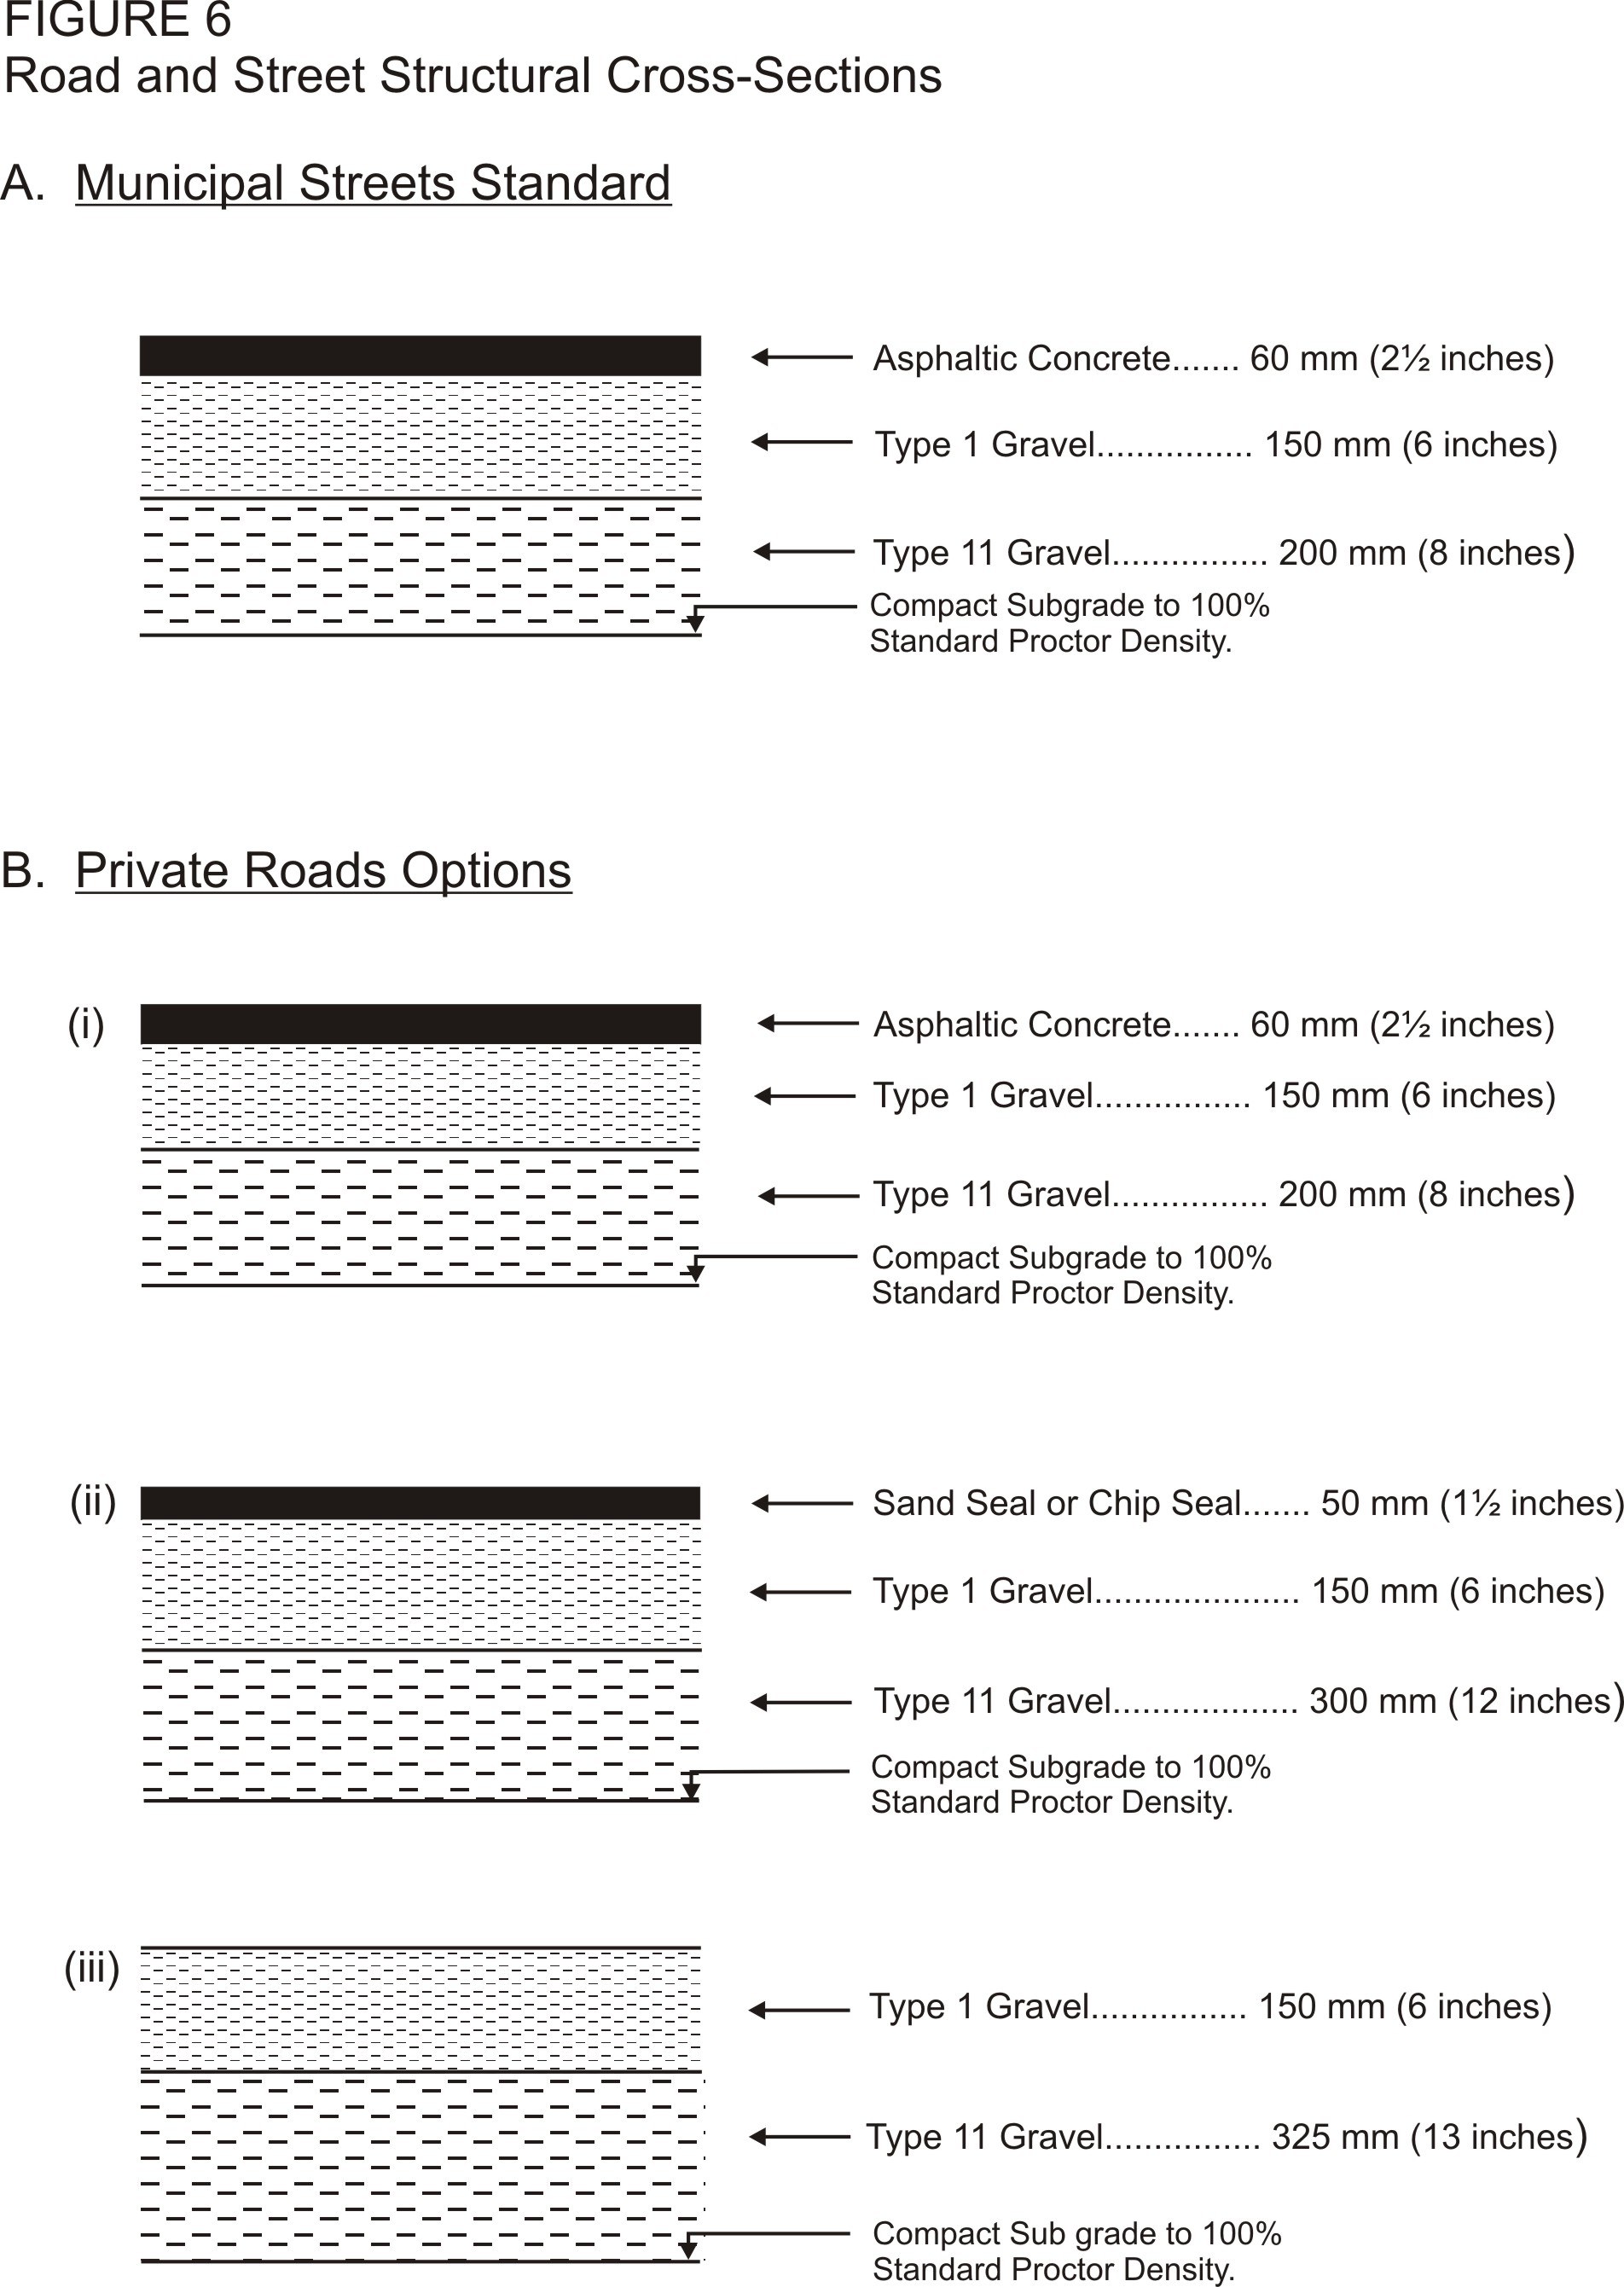 Road Standards_Cross-sections Fig 6